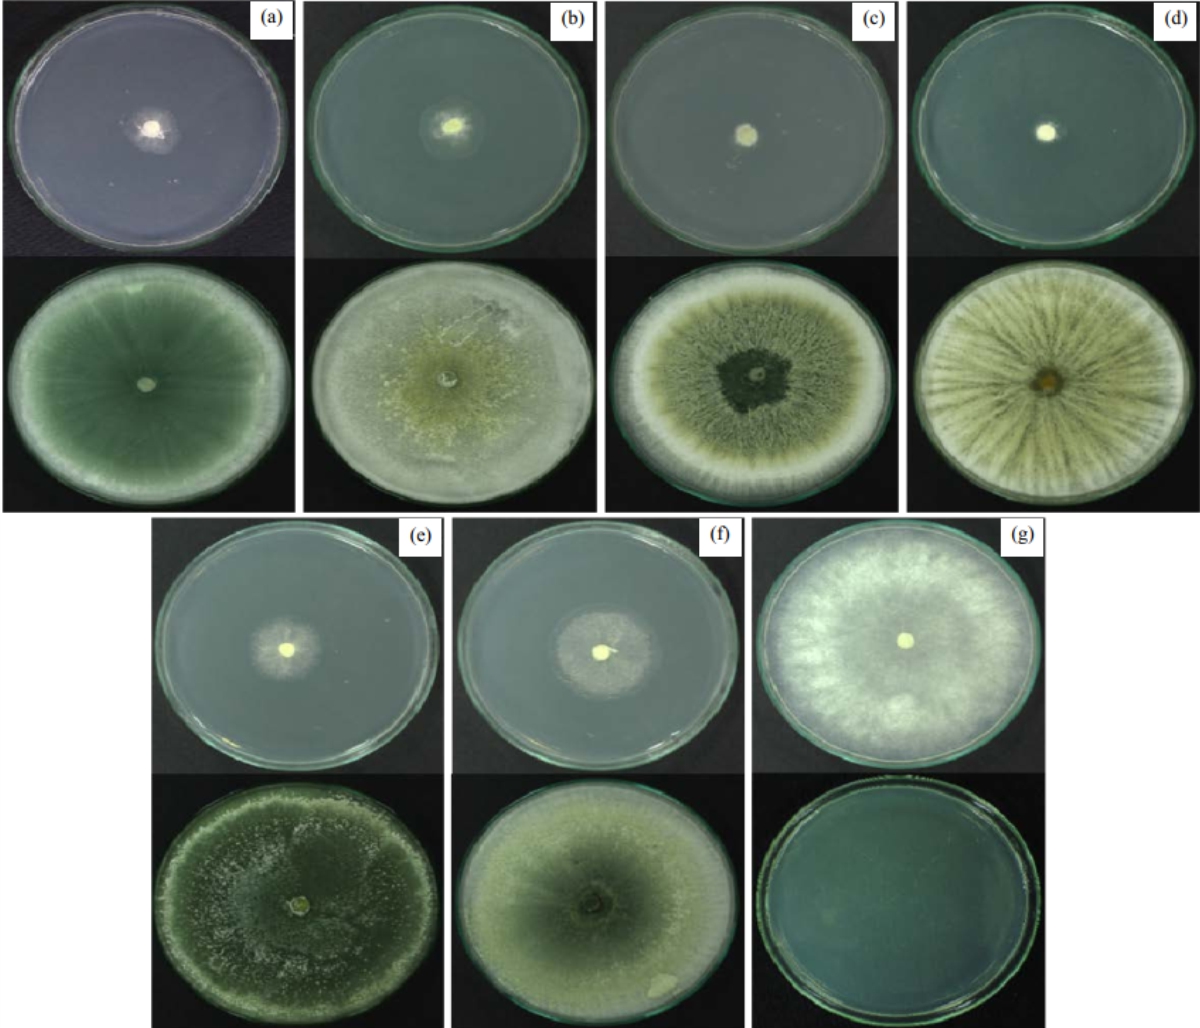 Image for - Mycelial Inhibition of Sclerotinia sclerotiorum by Trichoderma spp. Volatile Organic Compounds in Distinct Stages of Development